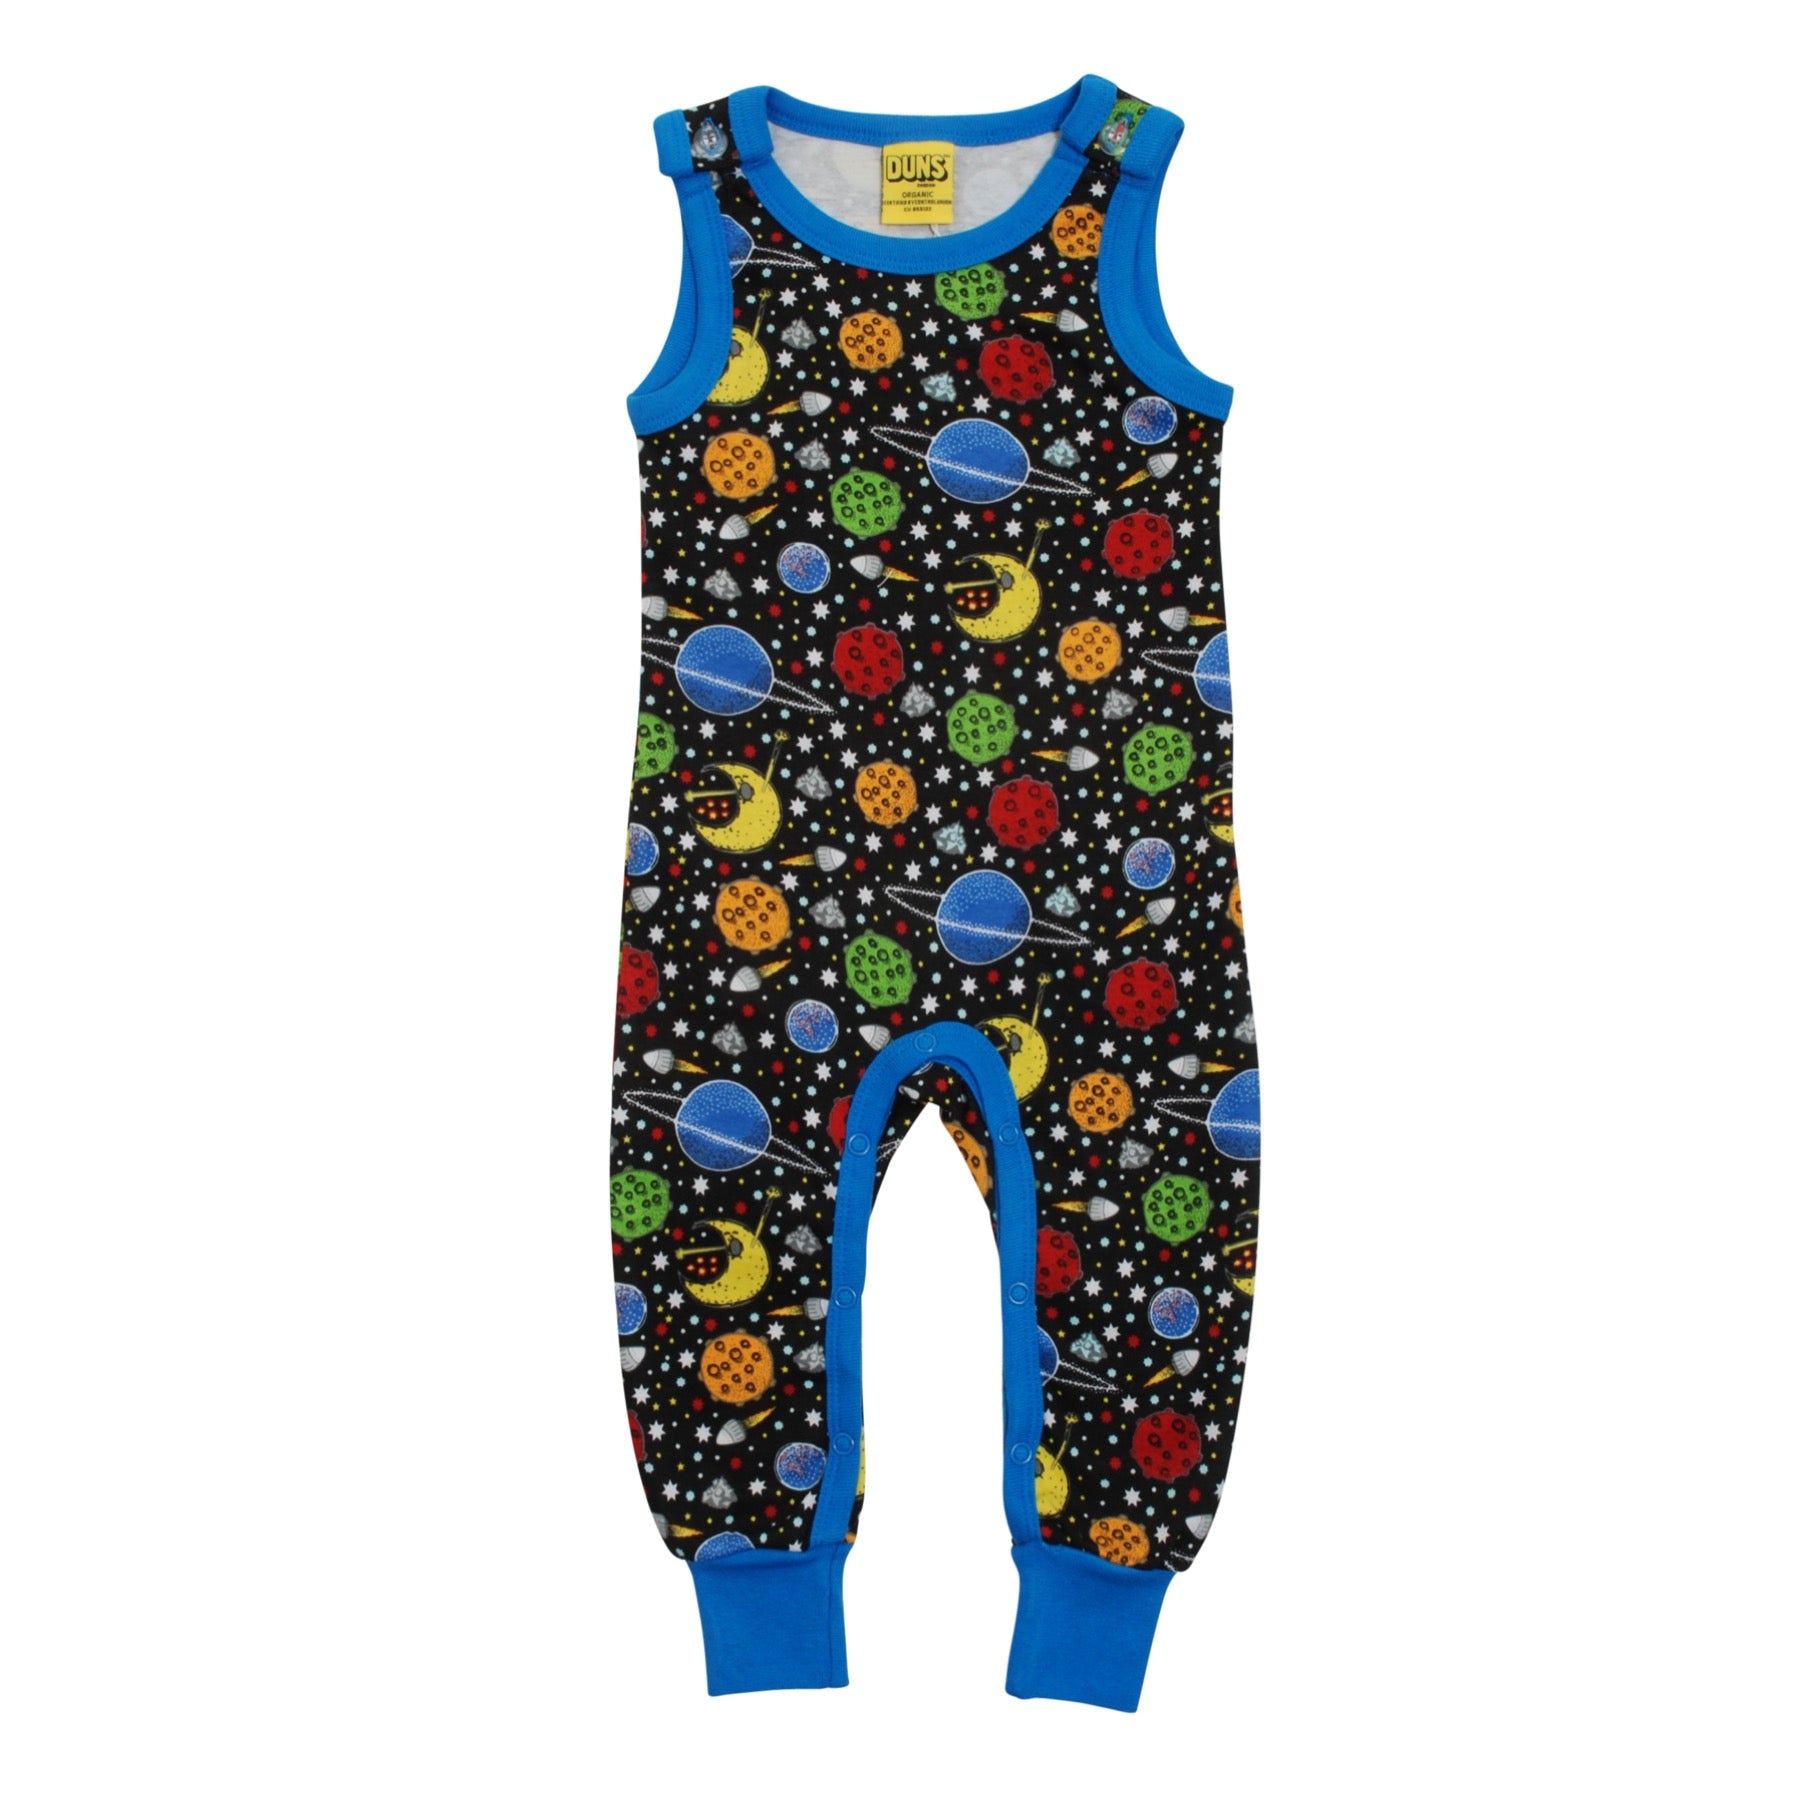 DUNS Sweden Dungarees Space